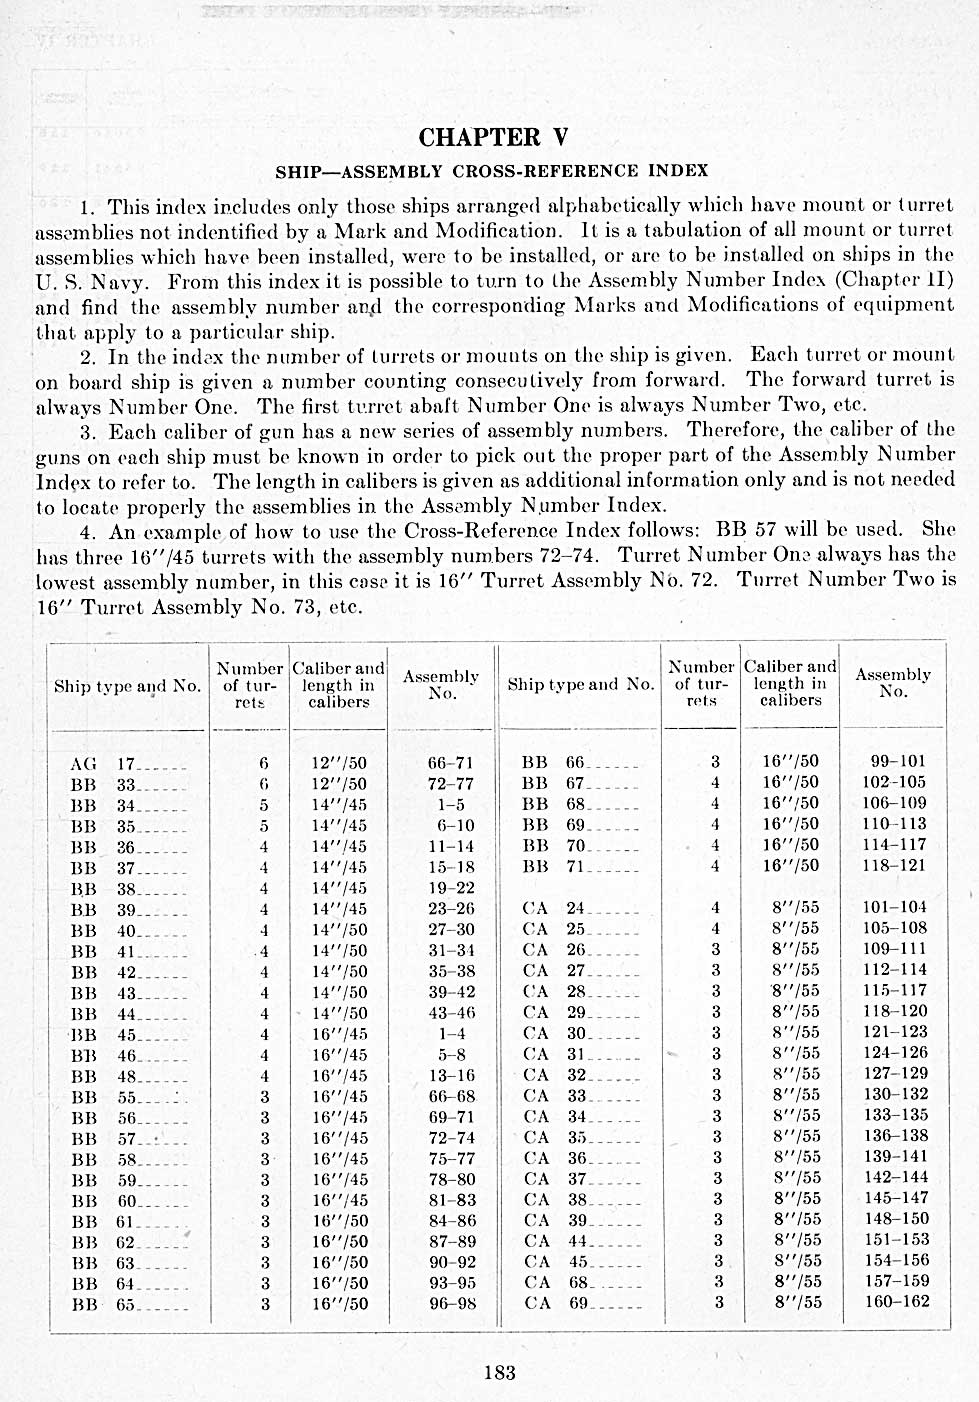 CHAPTER V
SHIP-ASSEMBLY CROSS-REFERENCE INDEX
1. This index includes only those ships arranged alphabetically which have mount or turret assemblies not identified by a Mark and Modification. It is a tabulation of all mount or turret assemblies which have been installed, were to be installed, or are to be installed on ships in the U. S. Navy. From this index it is possible to turn to the Assembly Number Index (Chapter 1I) and find the assembly number and the corresponding Marks and Modifications of equipment that apply to a particular ship.
2. In the index the number of turrets or mounts on the ship is given. Each turret or mount on board ship is given a number counting consecutively from forward. The forward turret is always Number One. The first turret abaft Number One is always Number Two, etc.
3. Each caliber of gun has a new series of assembly numbers. Therefore, the caliber of the guns on each ship must be known in order to pick out the proper part of the Assembly N umber Index to refer to. The length in calibers is given as additional information only and is not needed to locate properly the assemblies in the Assembly Number Index.
4. An example of how to use the Cross-Reference Index follows: BB 57 will be used. She has three 16 inch/45 turrets with the assembly numbers 72-74. Turret Number One always has the lowest assembly number, in this case it is 16 inch Turret Assembly No. 72. Turret Number Two is 16 inch Turret Assembly No. 73, etc.